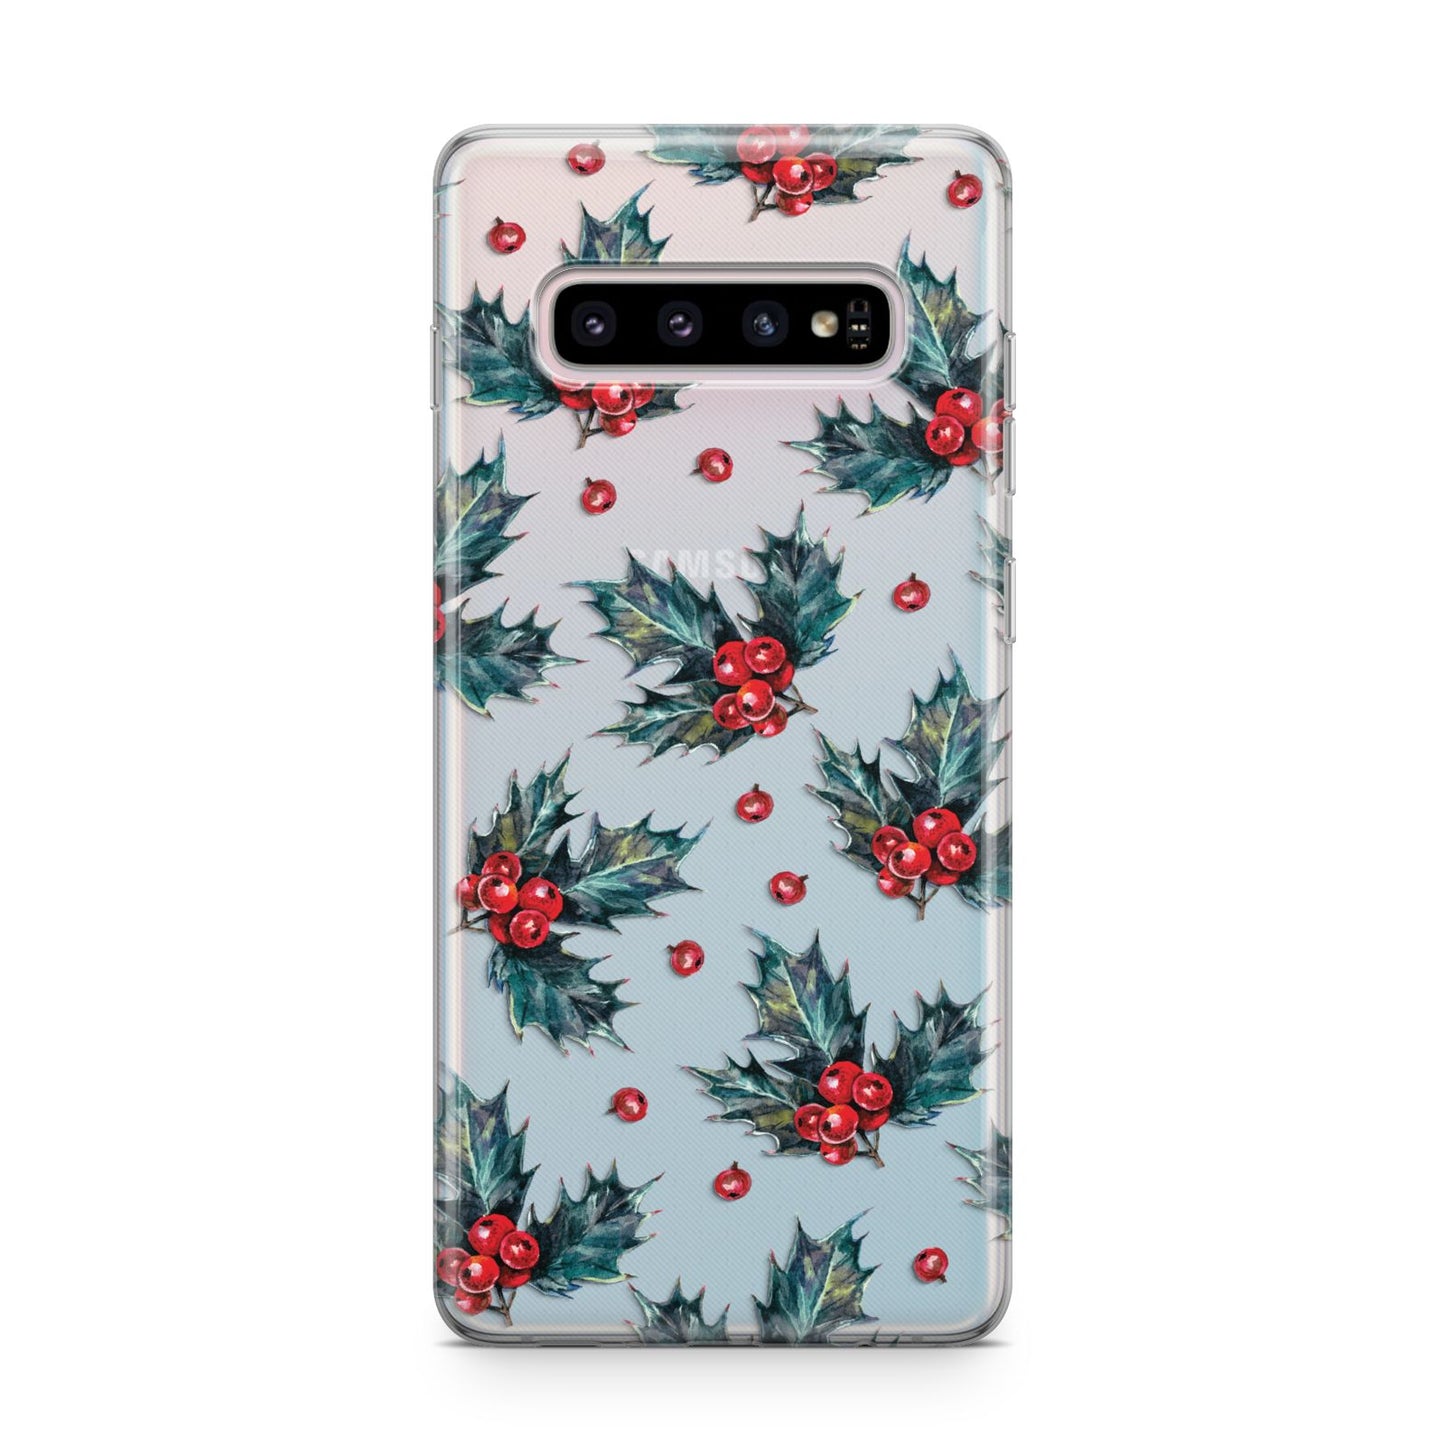 Holly berry Samsung Galaxy S10 Plus Case